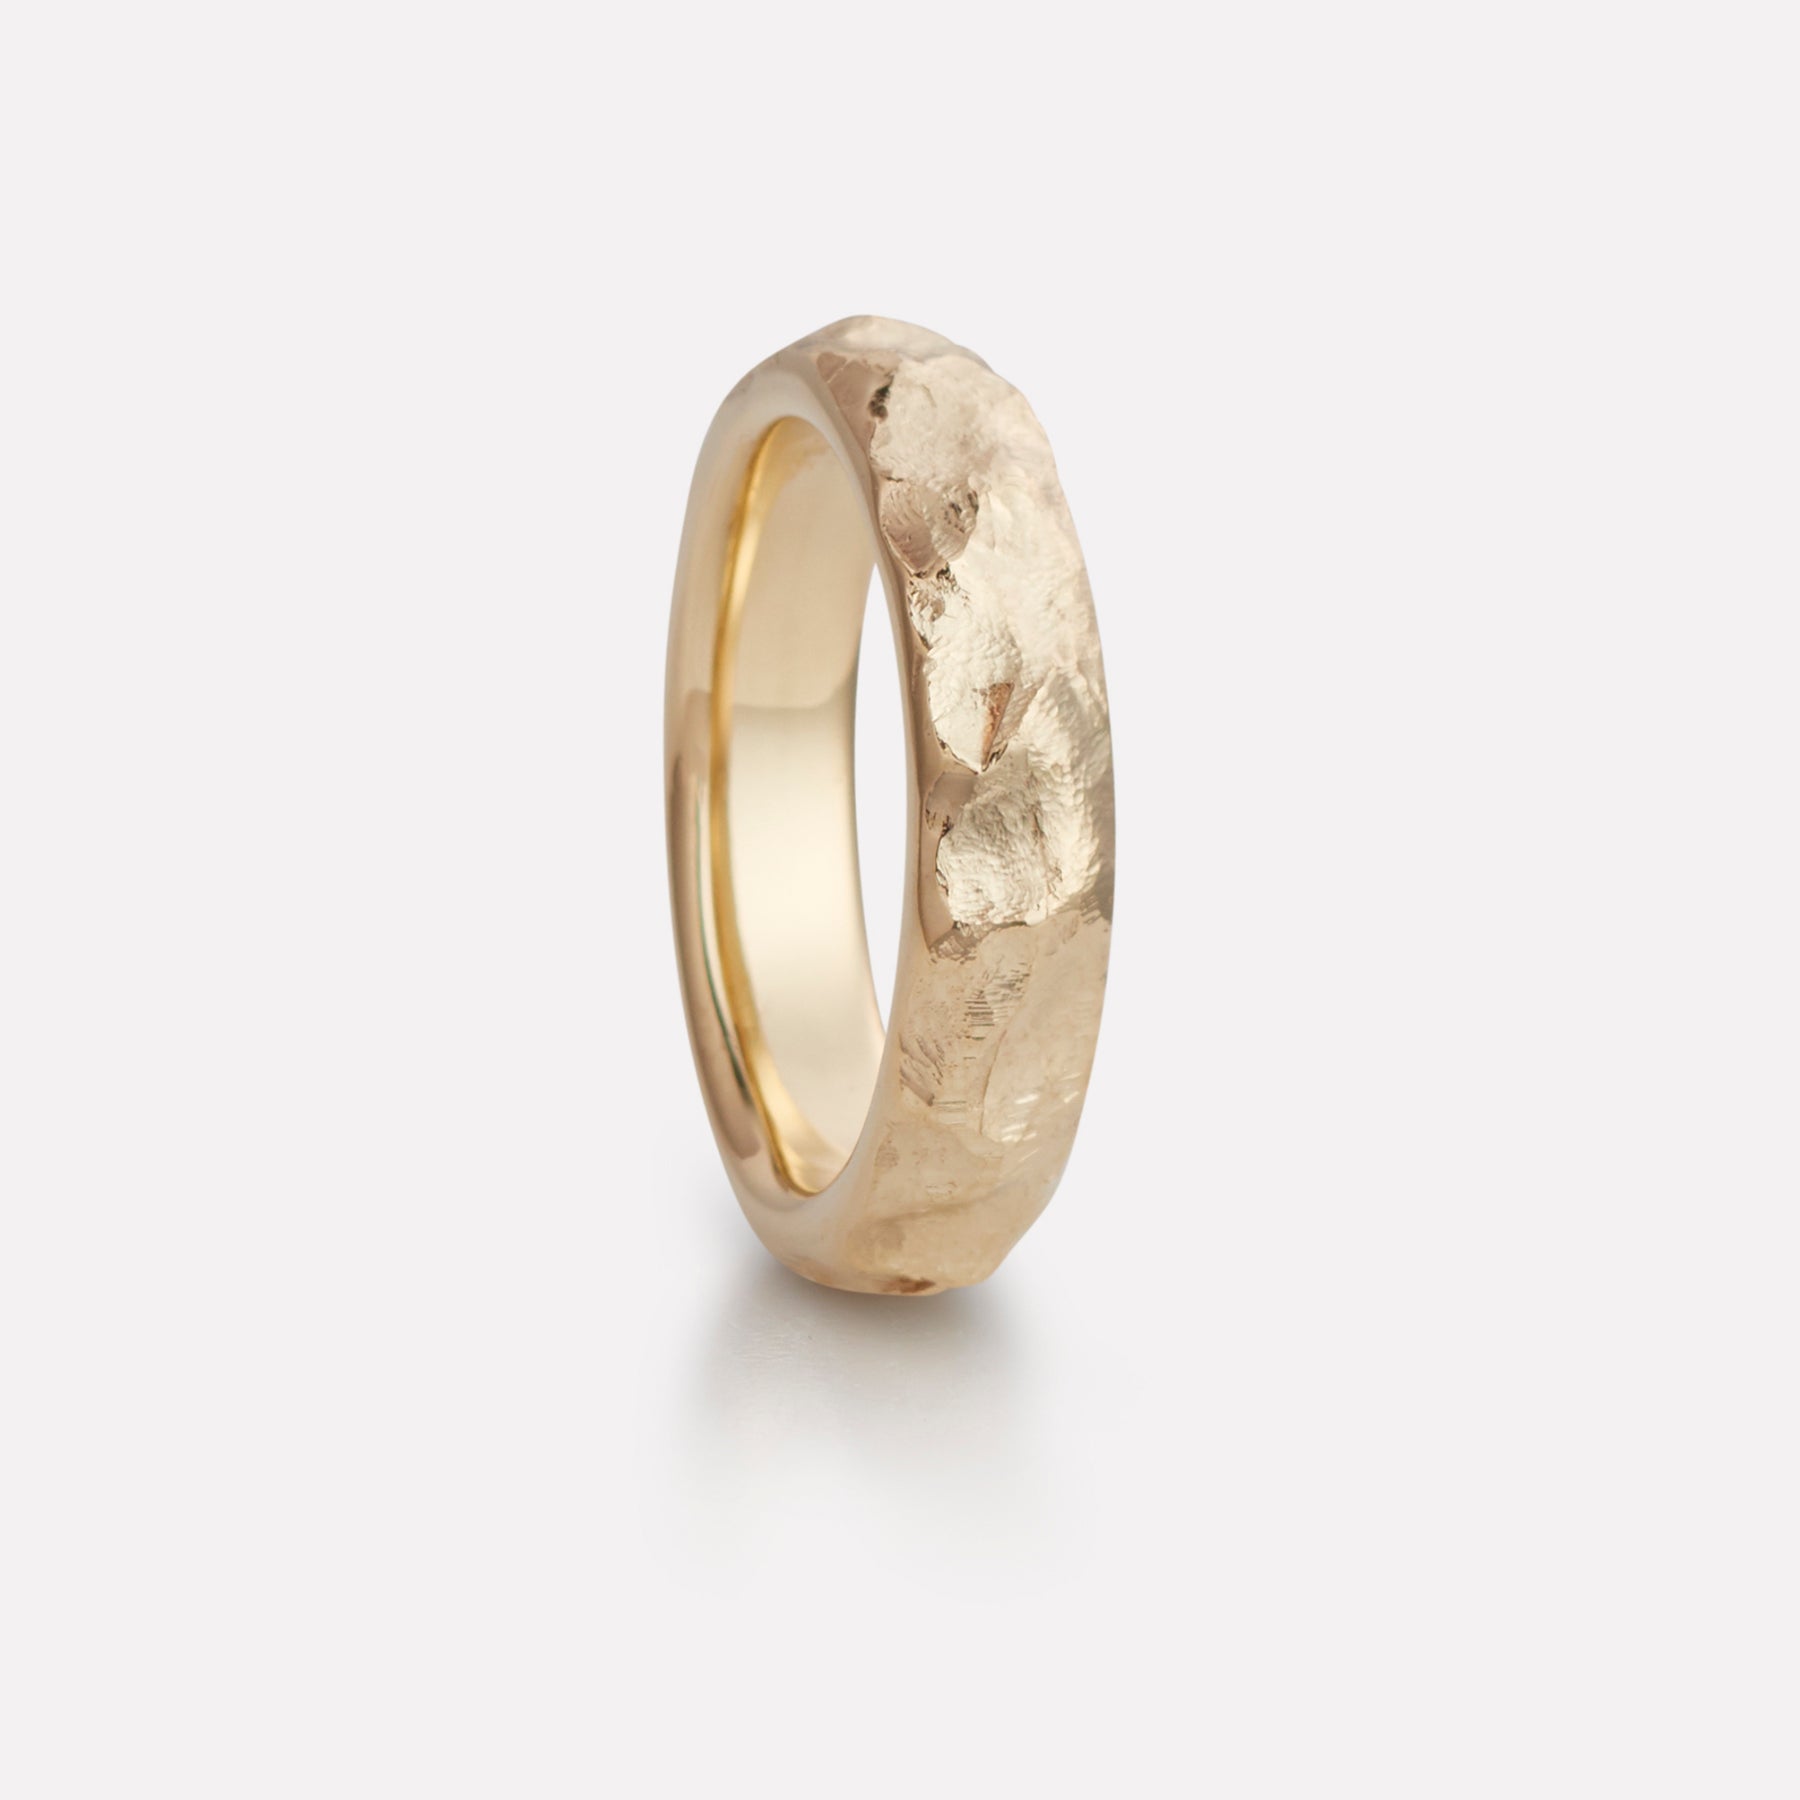 Fjell ring in yellow gold, men